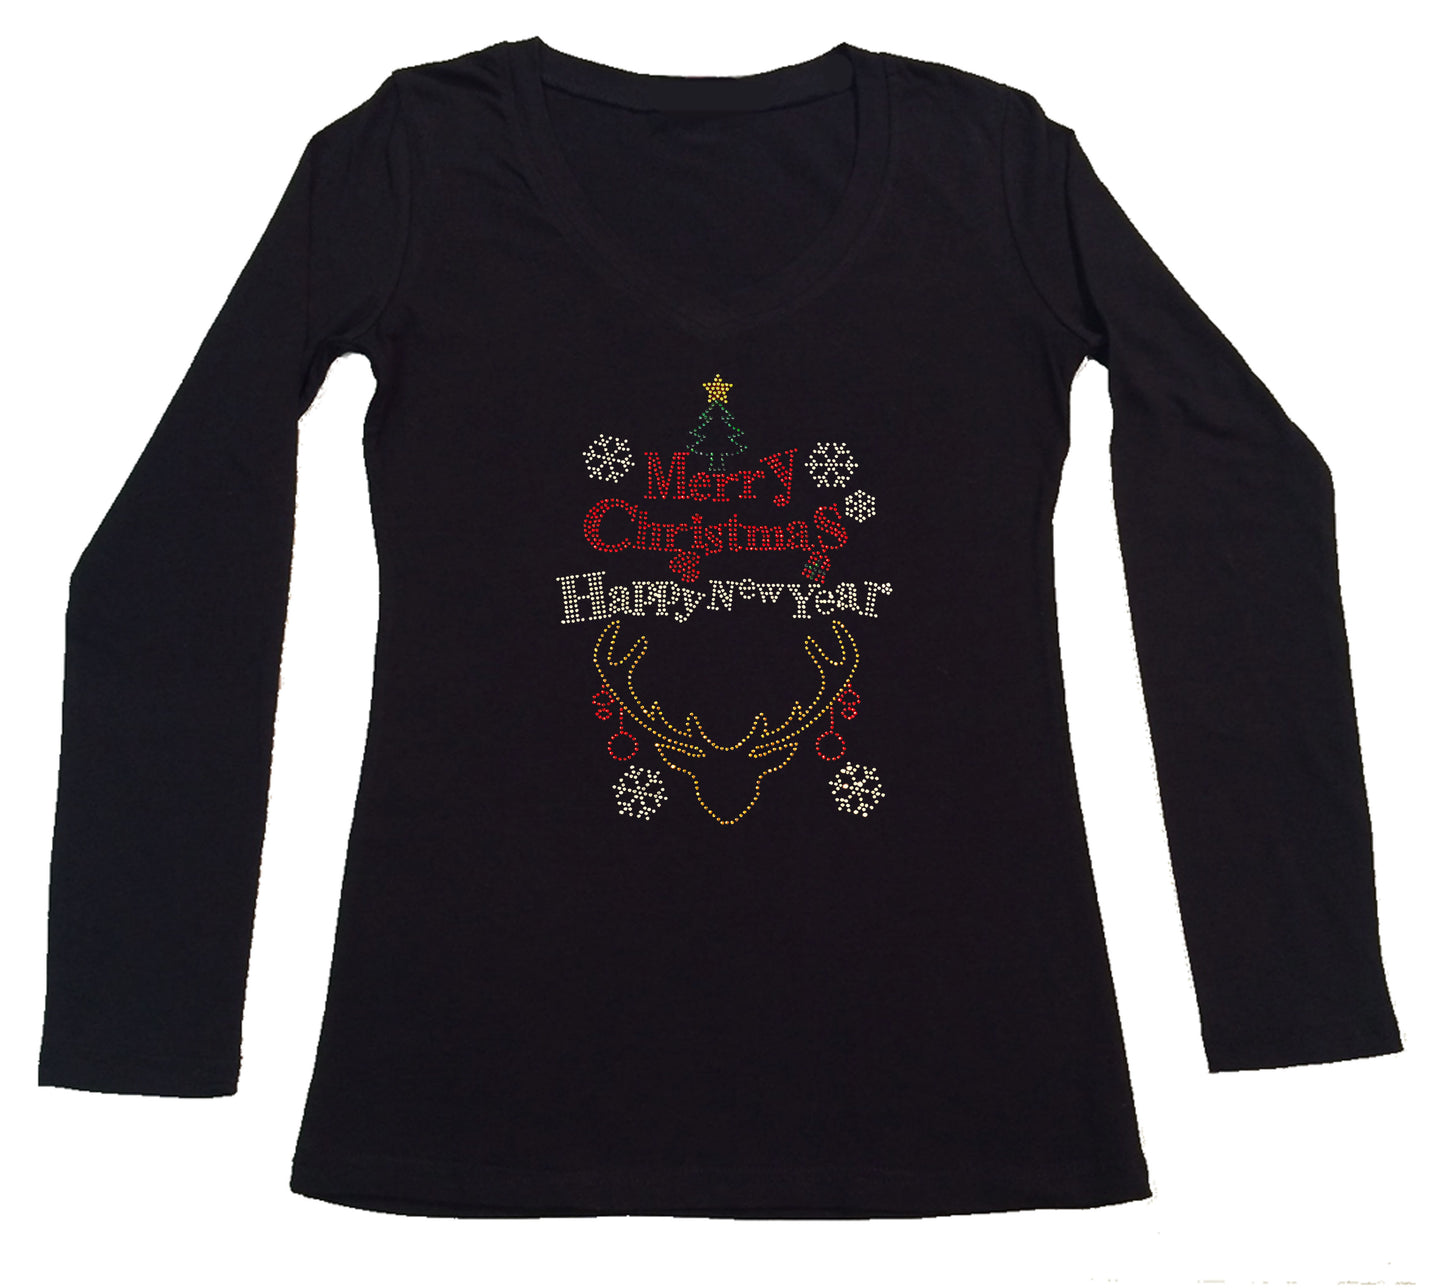 Womens T-shirt with Merry Christmas and Happy New Year in Rhinestones